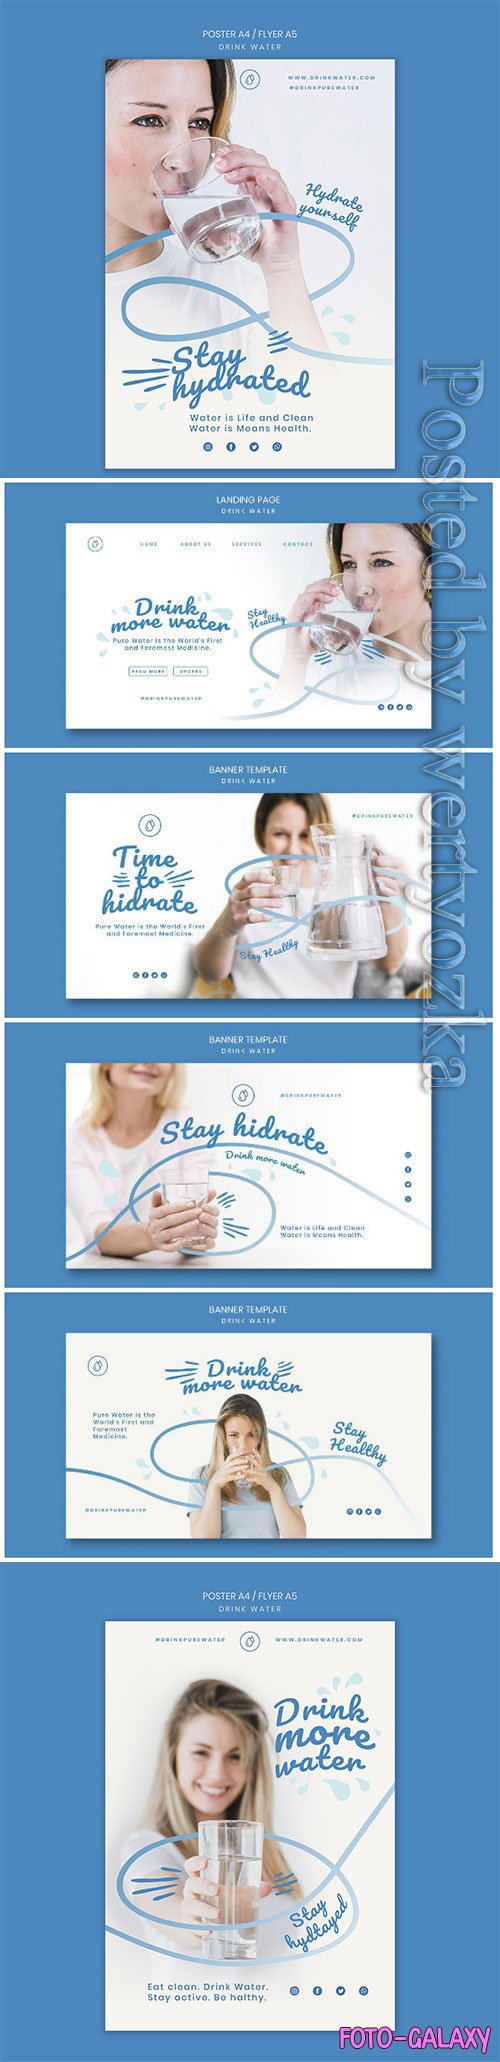 Drink water concept flyer template